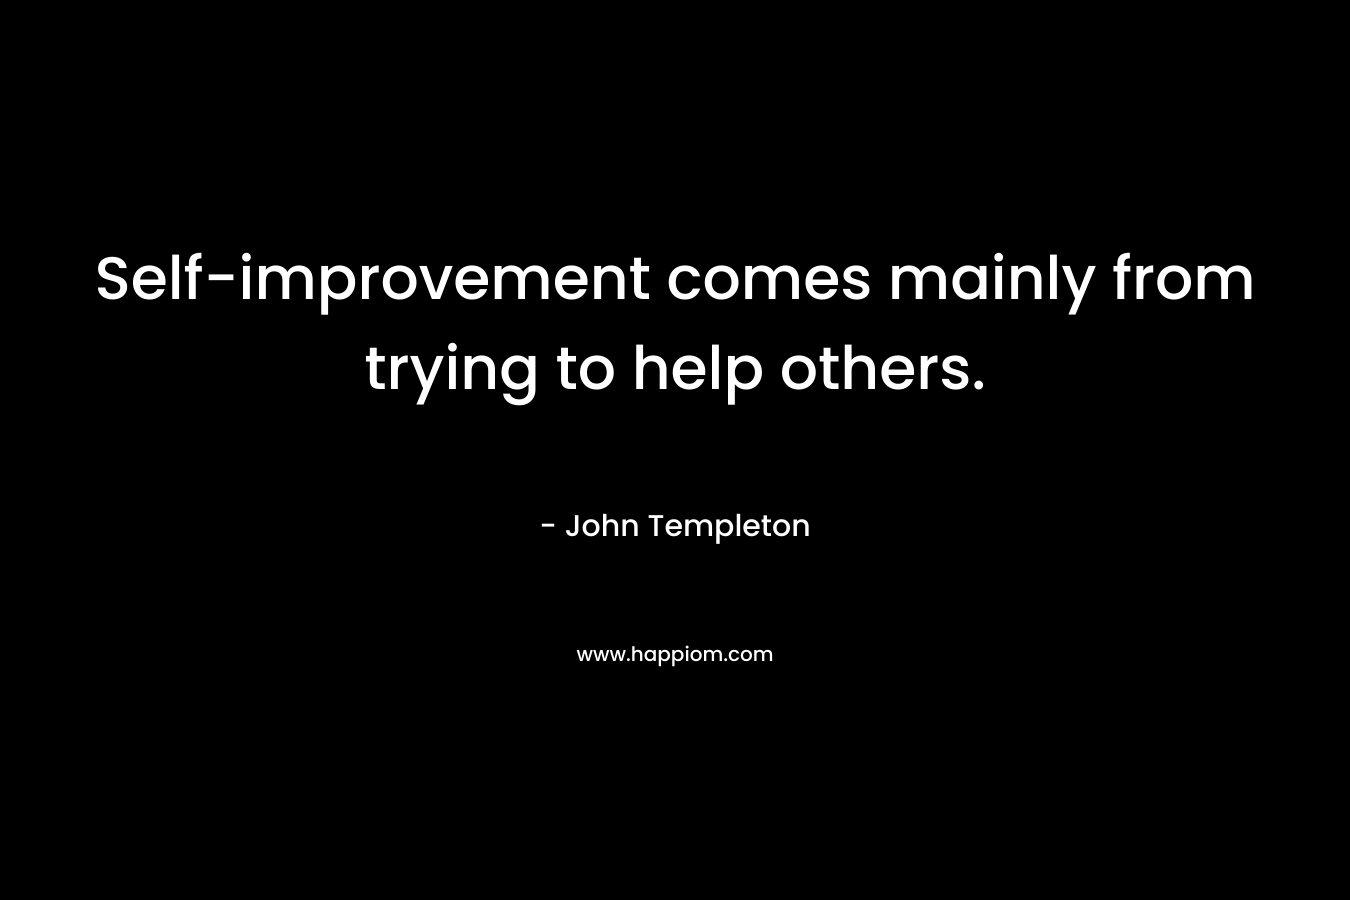 Self-improvement comes mainly from trying to help others.